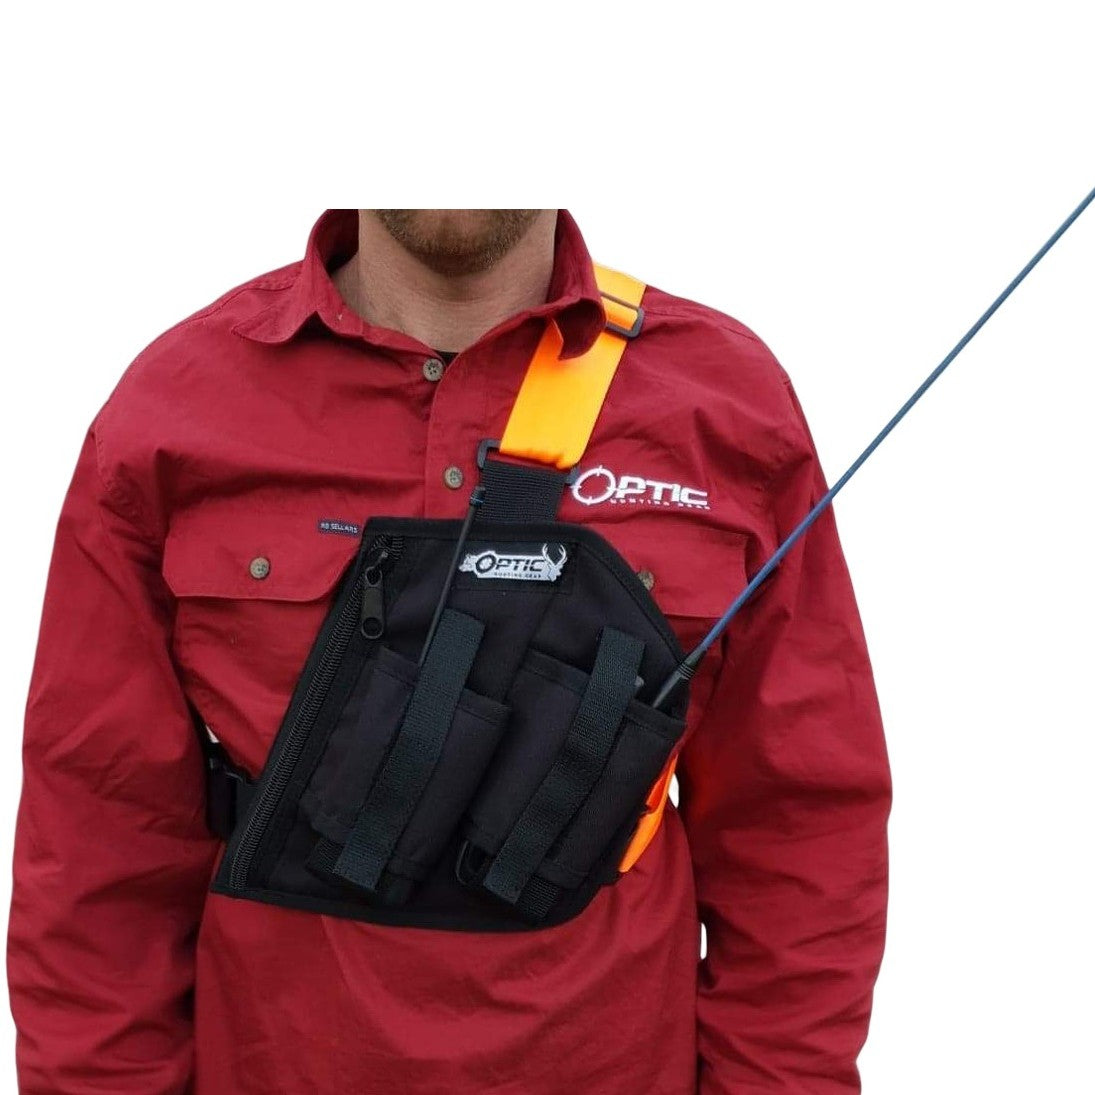 UHF / Tracker Holder With A Zipper Pocket - LEFT HAND - Mansfield Hunting & Fishing - Products to prepare for Corona Virus